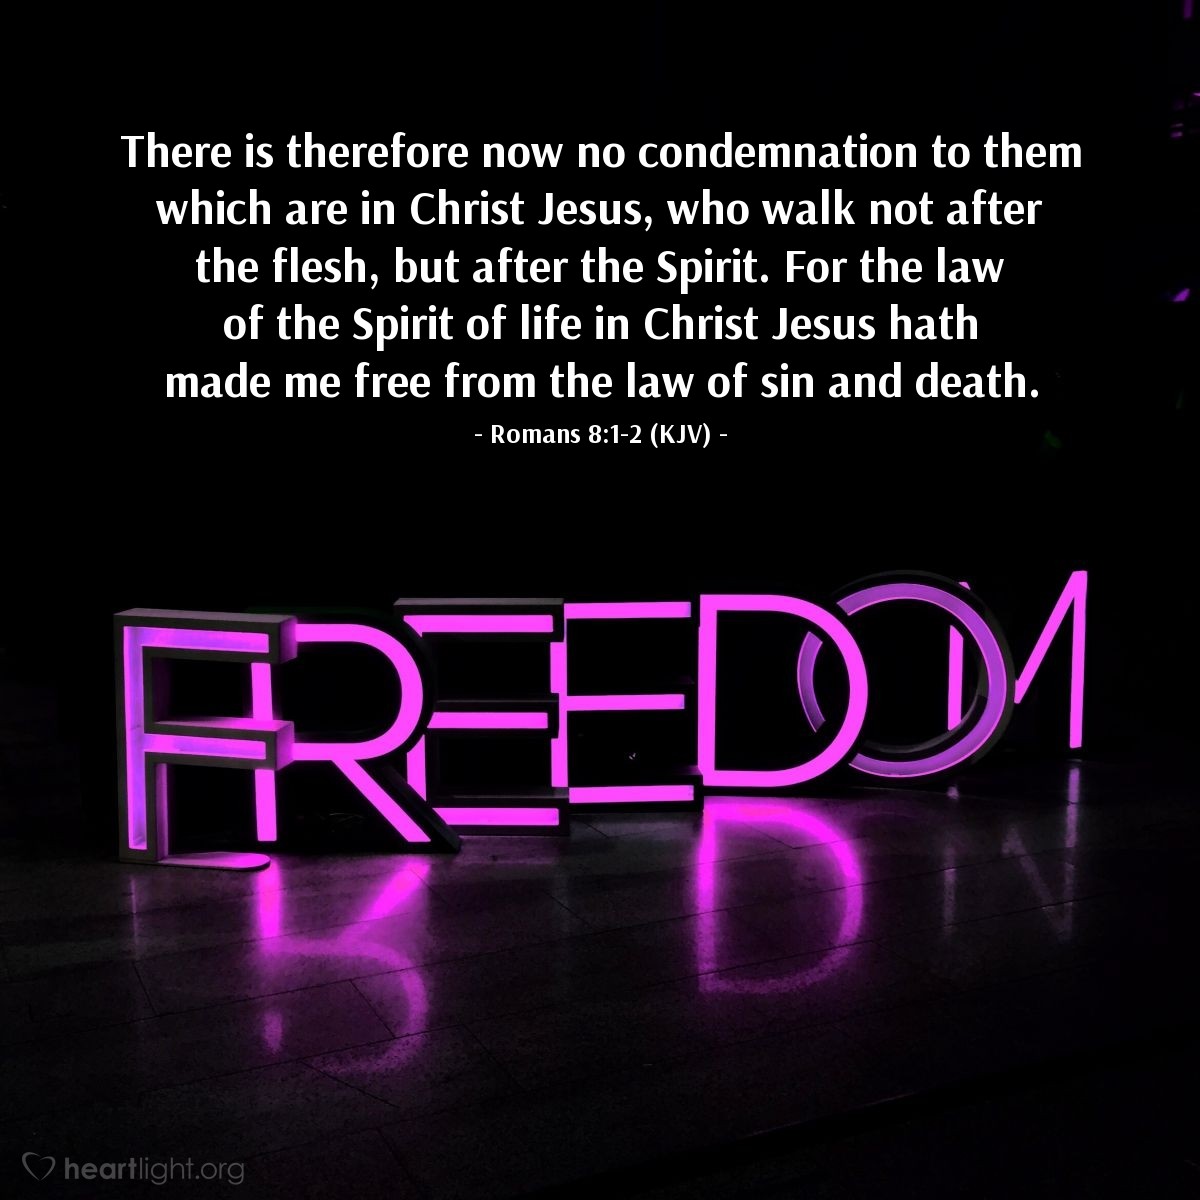 Illustration of Romans 8:1-2 (KJV) — There is therefore now no condemnation to them which are in Christ Jesus, who walk not after the flesh, but after the Spirit. For the law of the Spirit of life in Christ Jesus hath made me free from the law of sin and death.